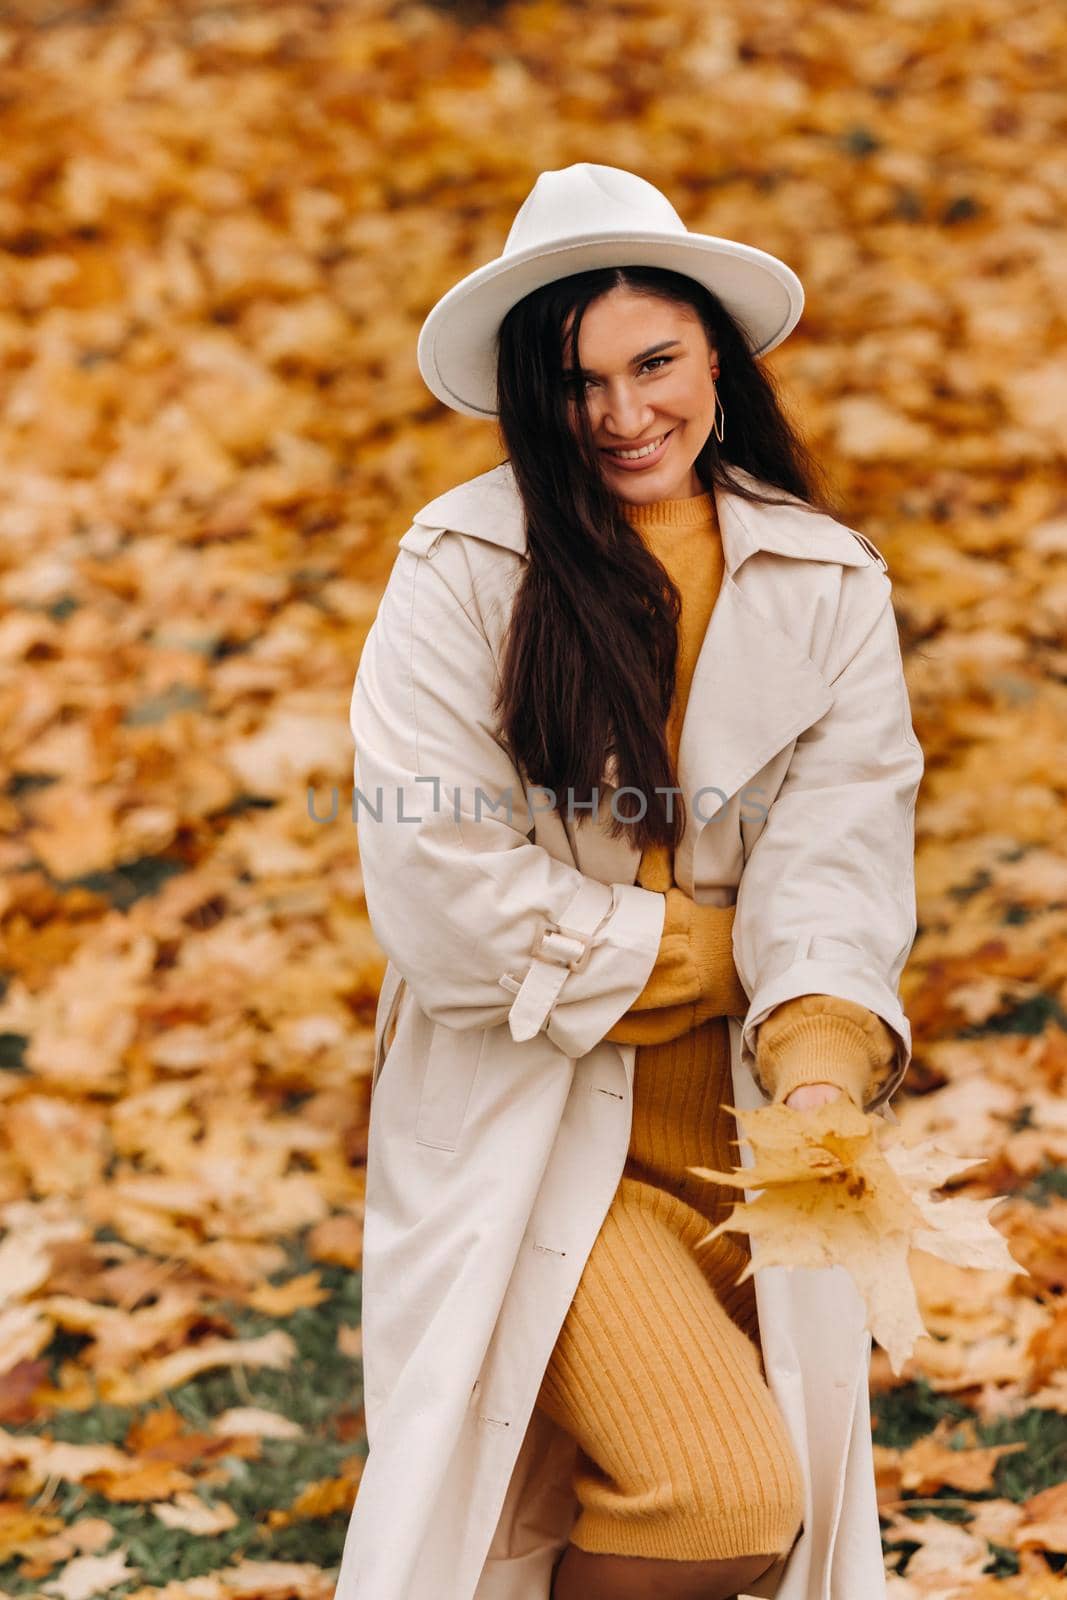 a cheerful girl in a white coat and hat smiles in an autumn Park.portrait of a smiling woman in Golden autumn